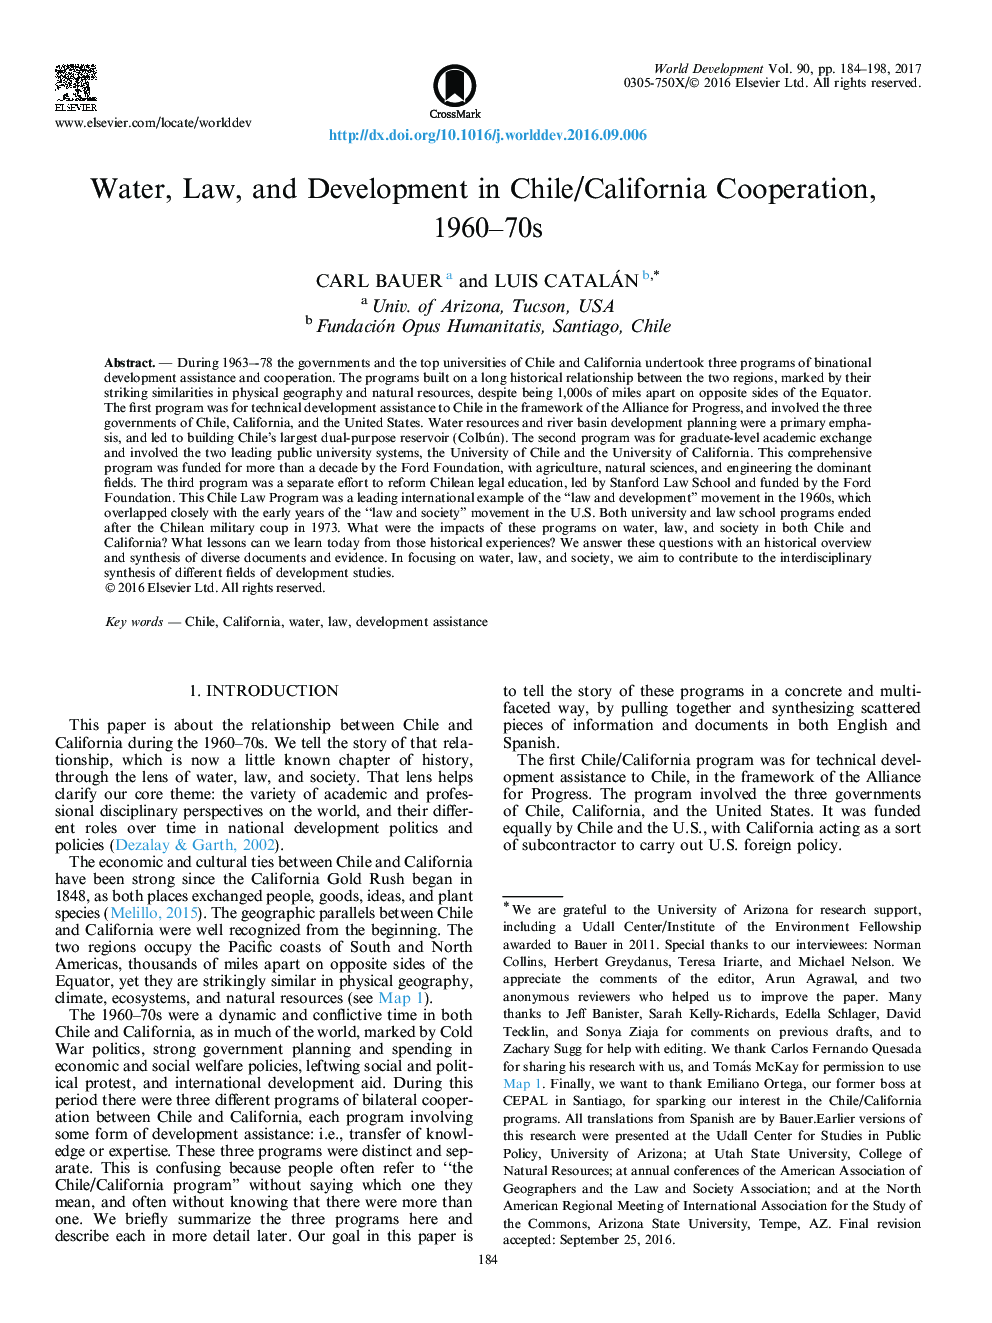 Water, Law, and Development in Chile/California Cooperation, 1960-70s